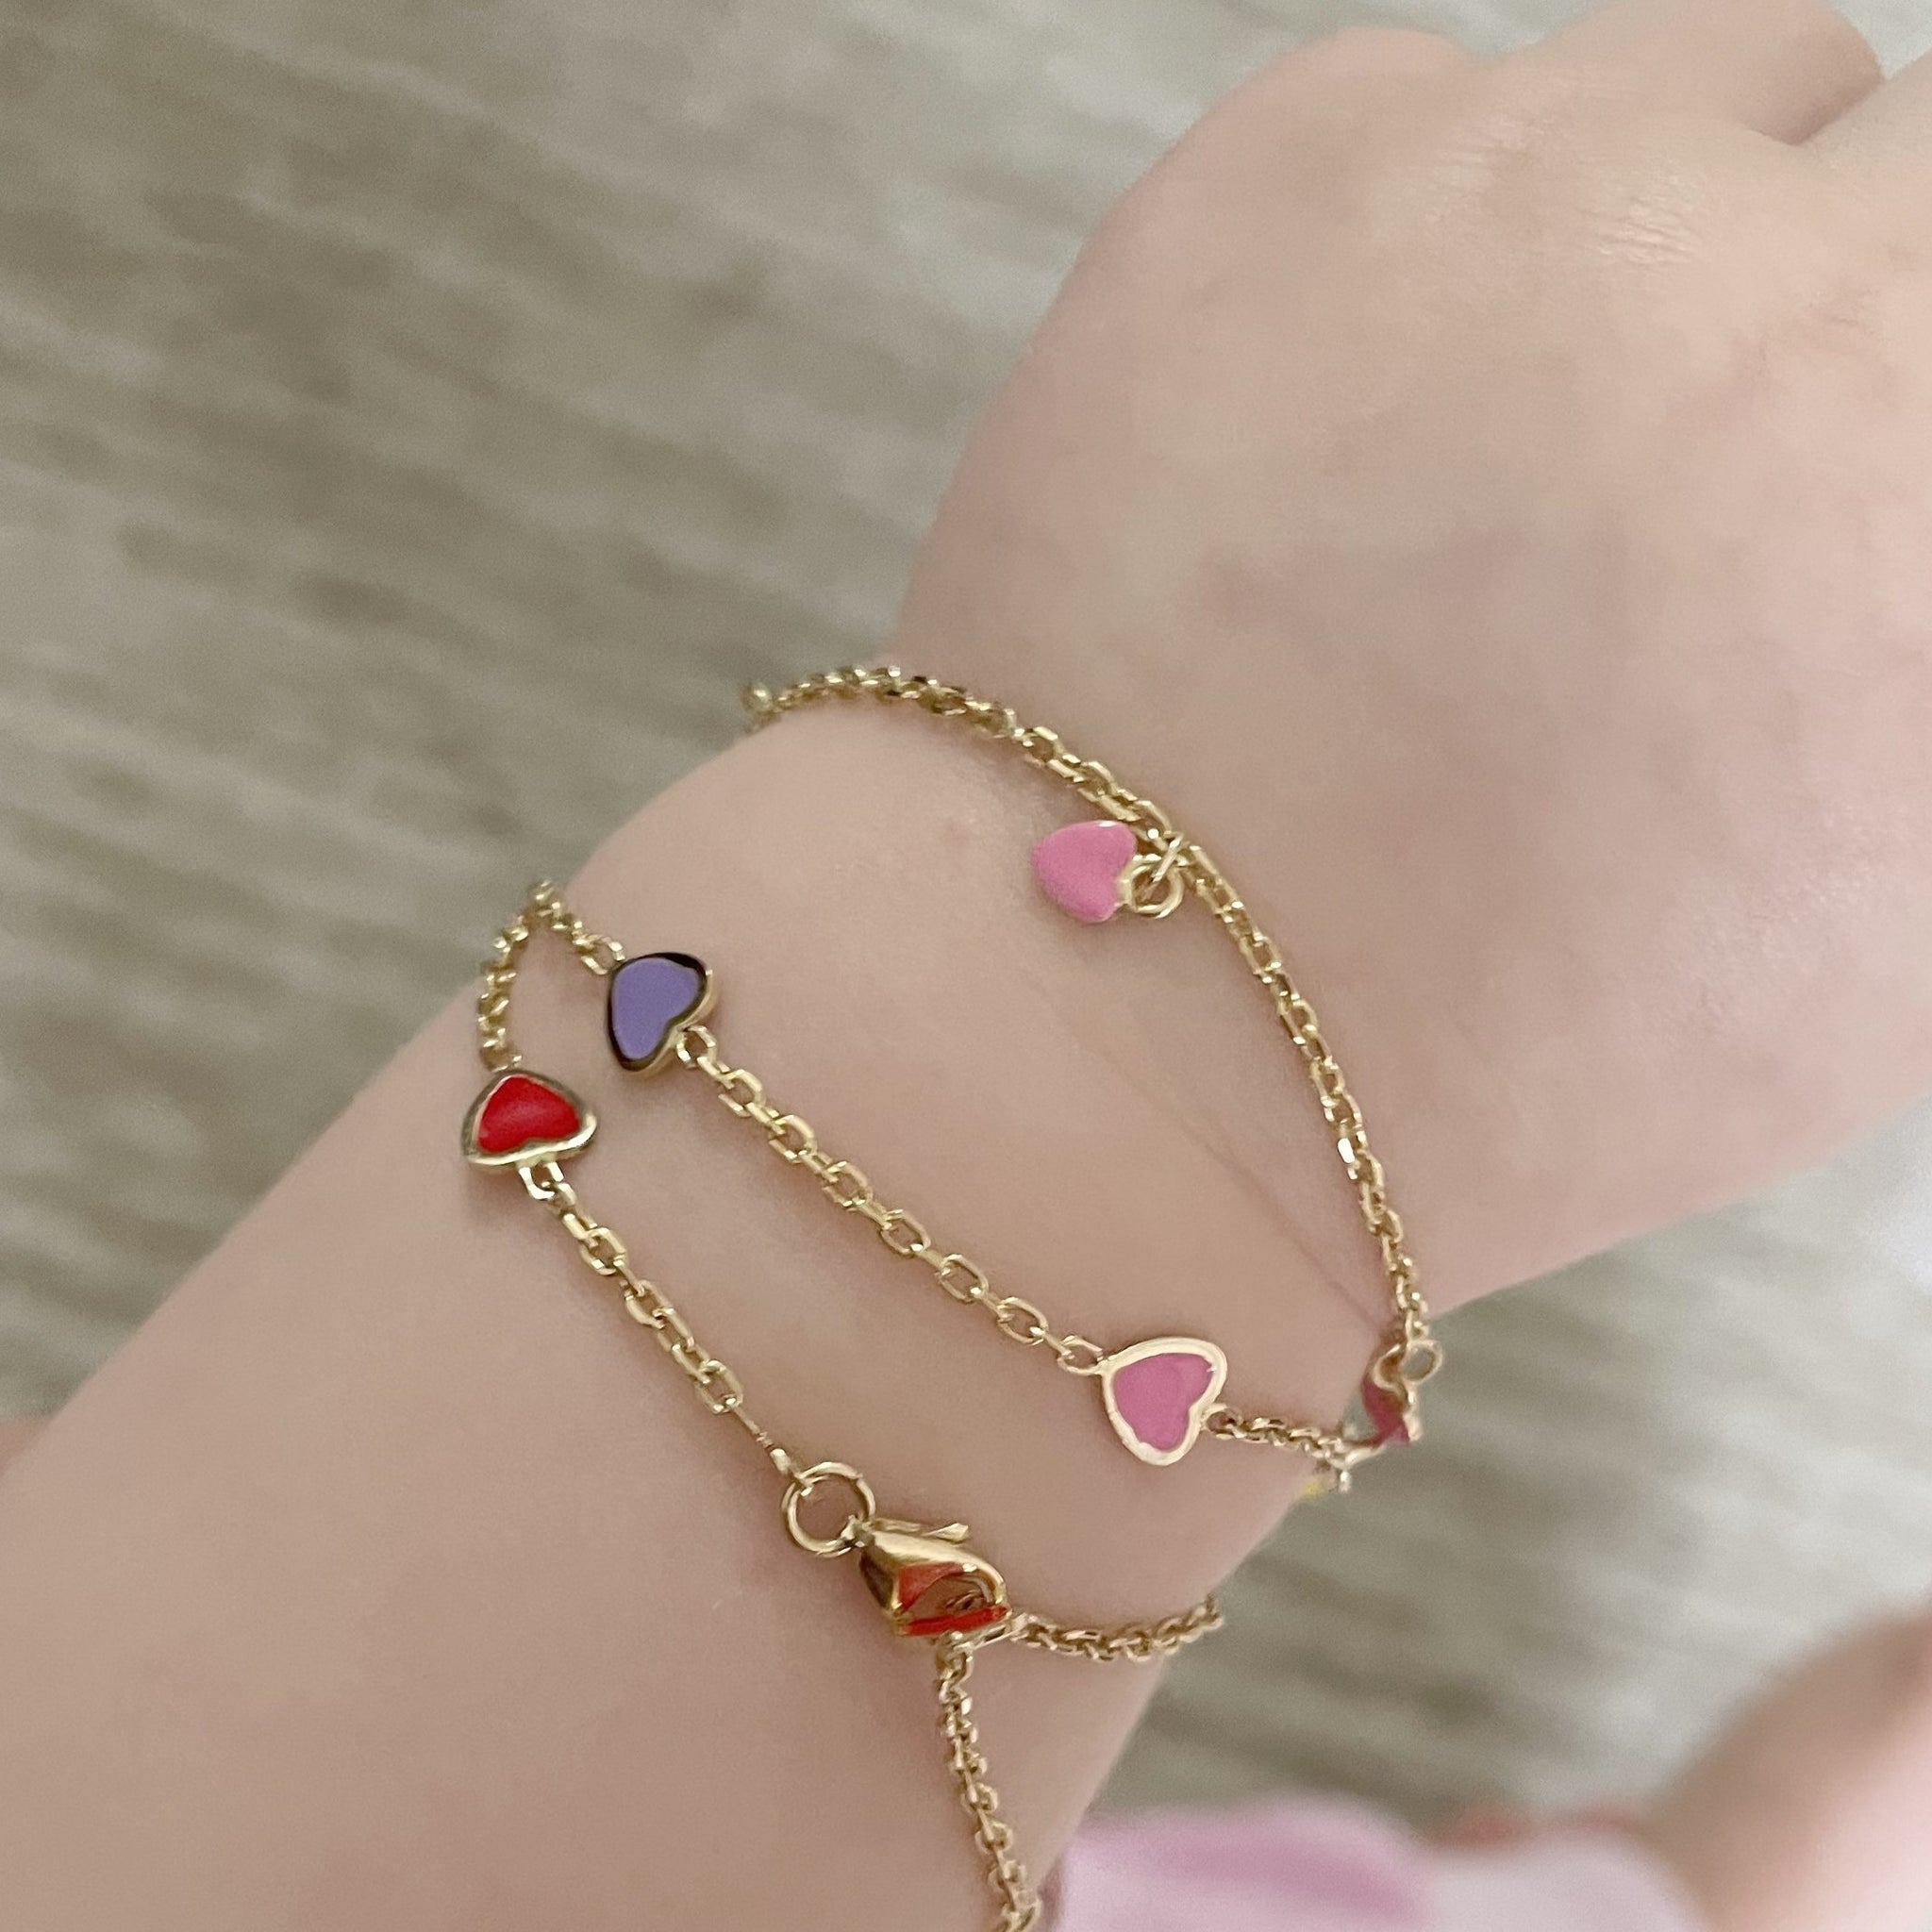 Buy a silver charm bracelet online at Evolve and receive a FREE mystery  charm! This is a limited time offer, so get in quick! | Instagram